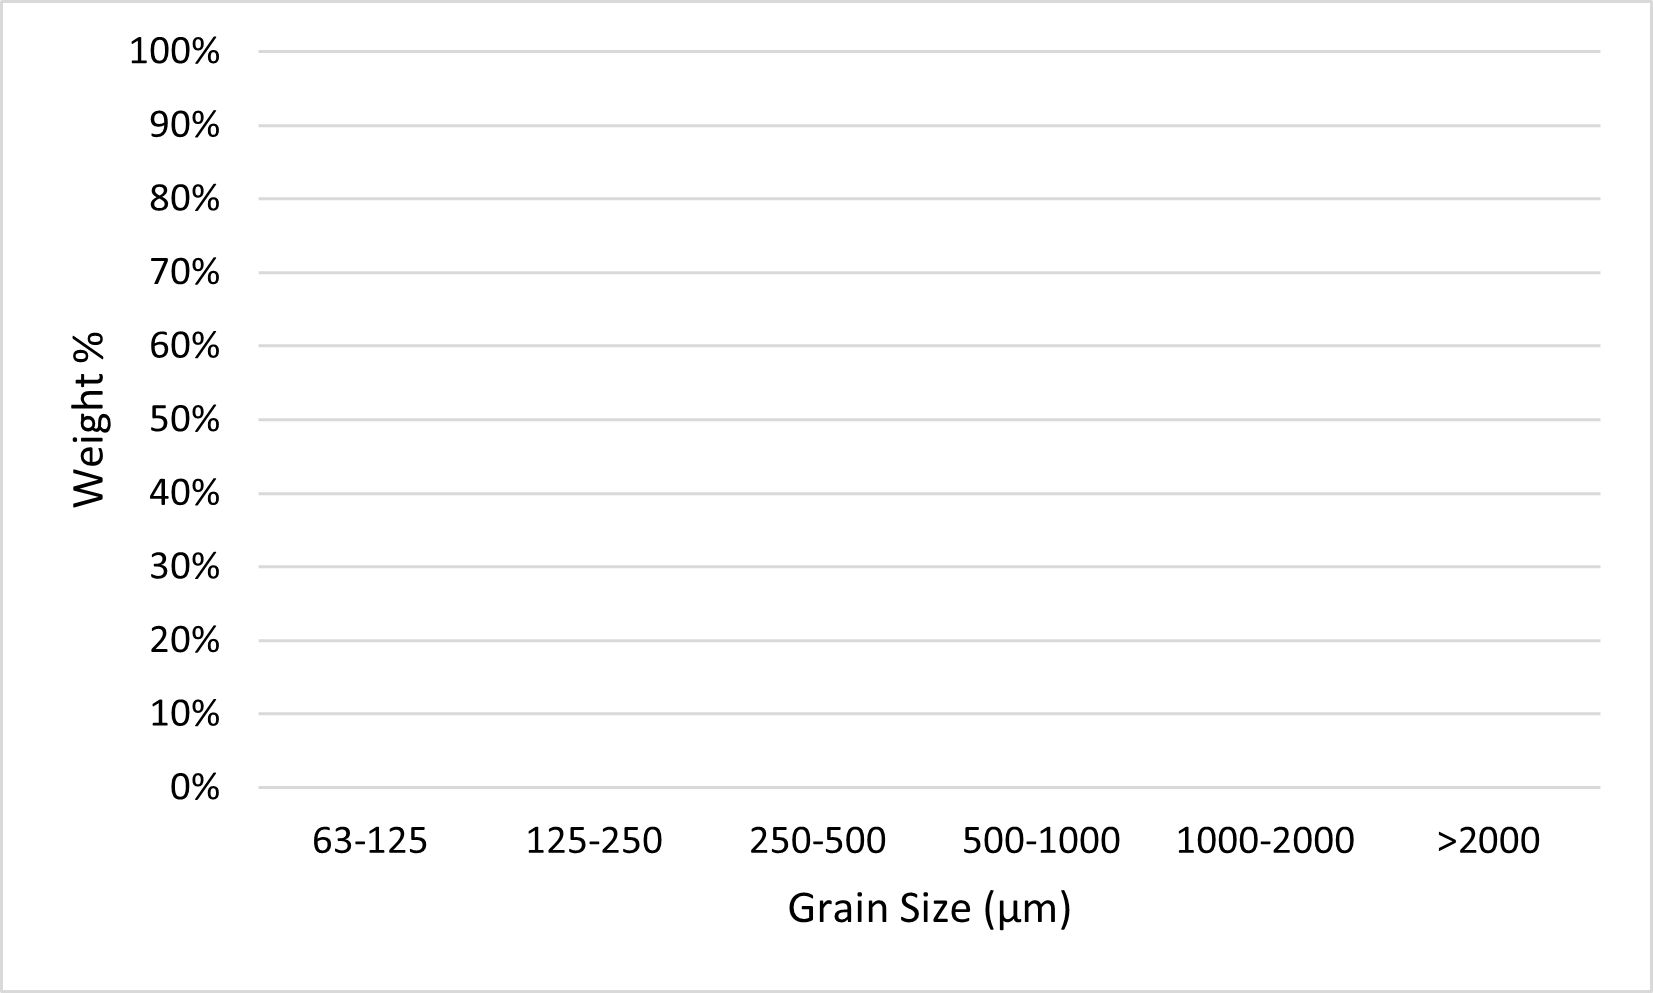 Grain size graph to use in Exercise 5.2.